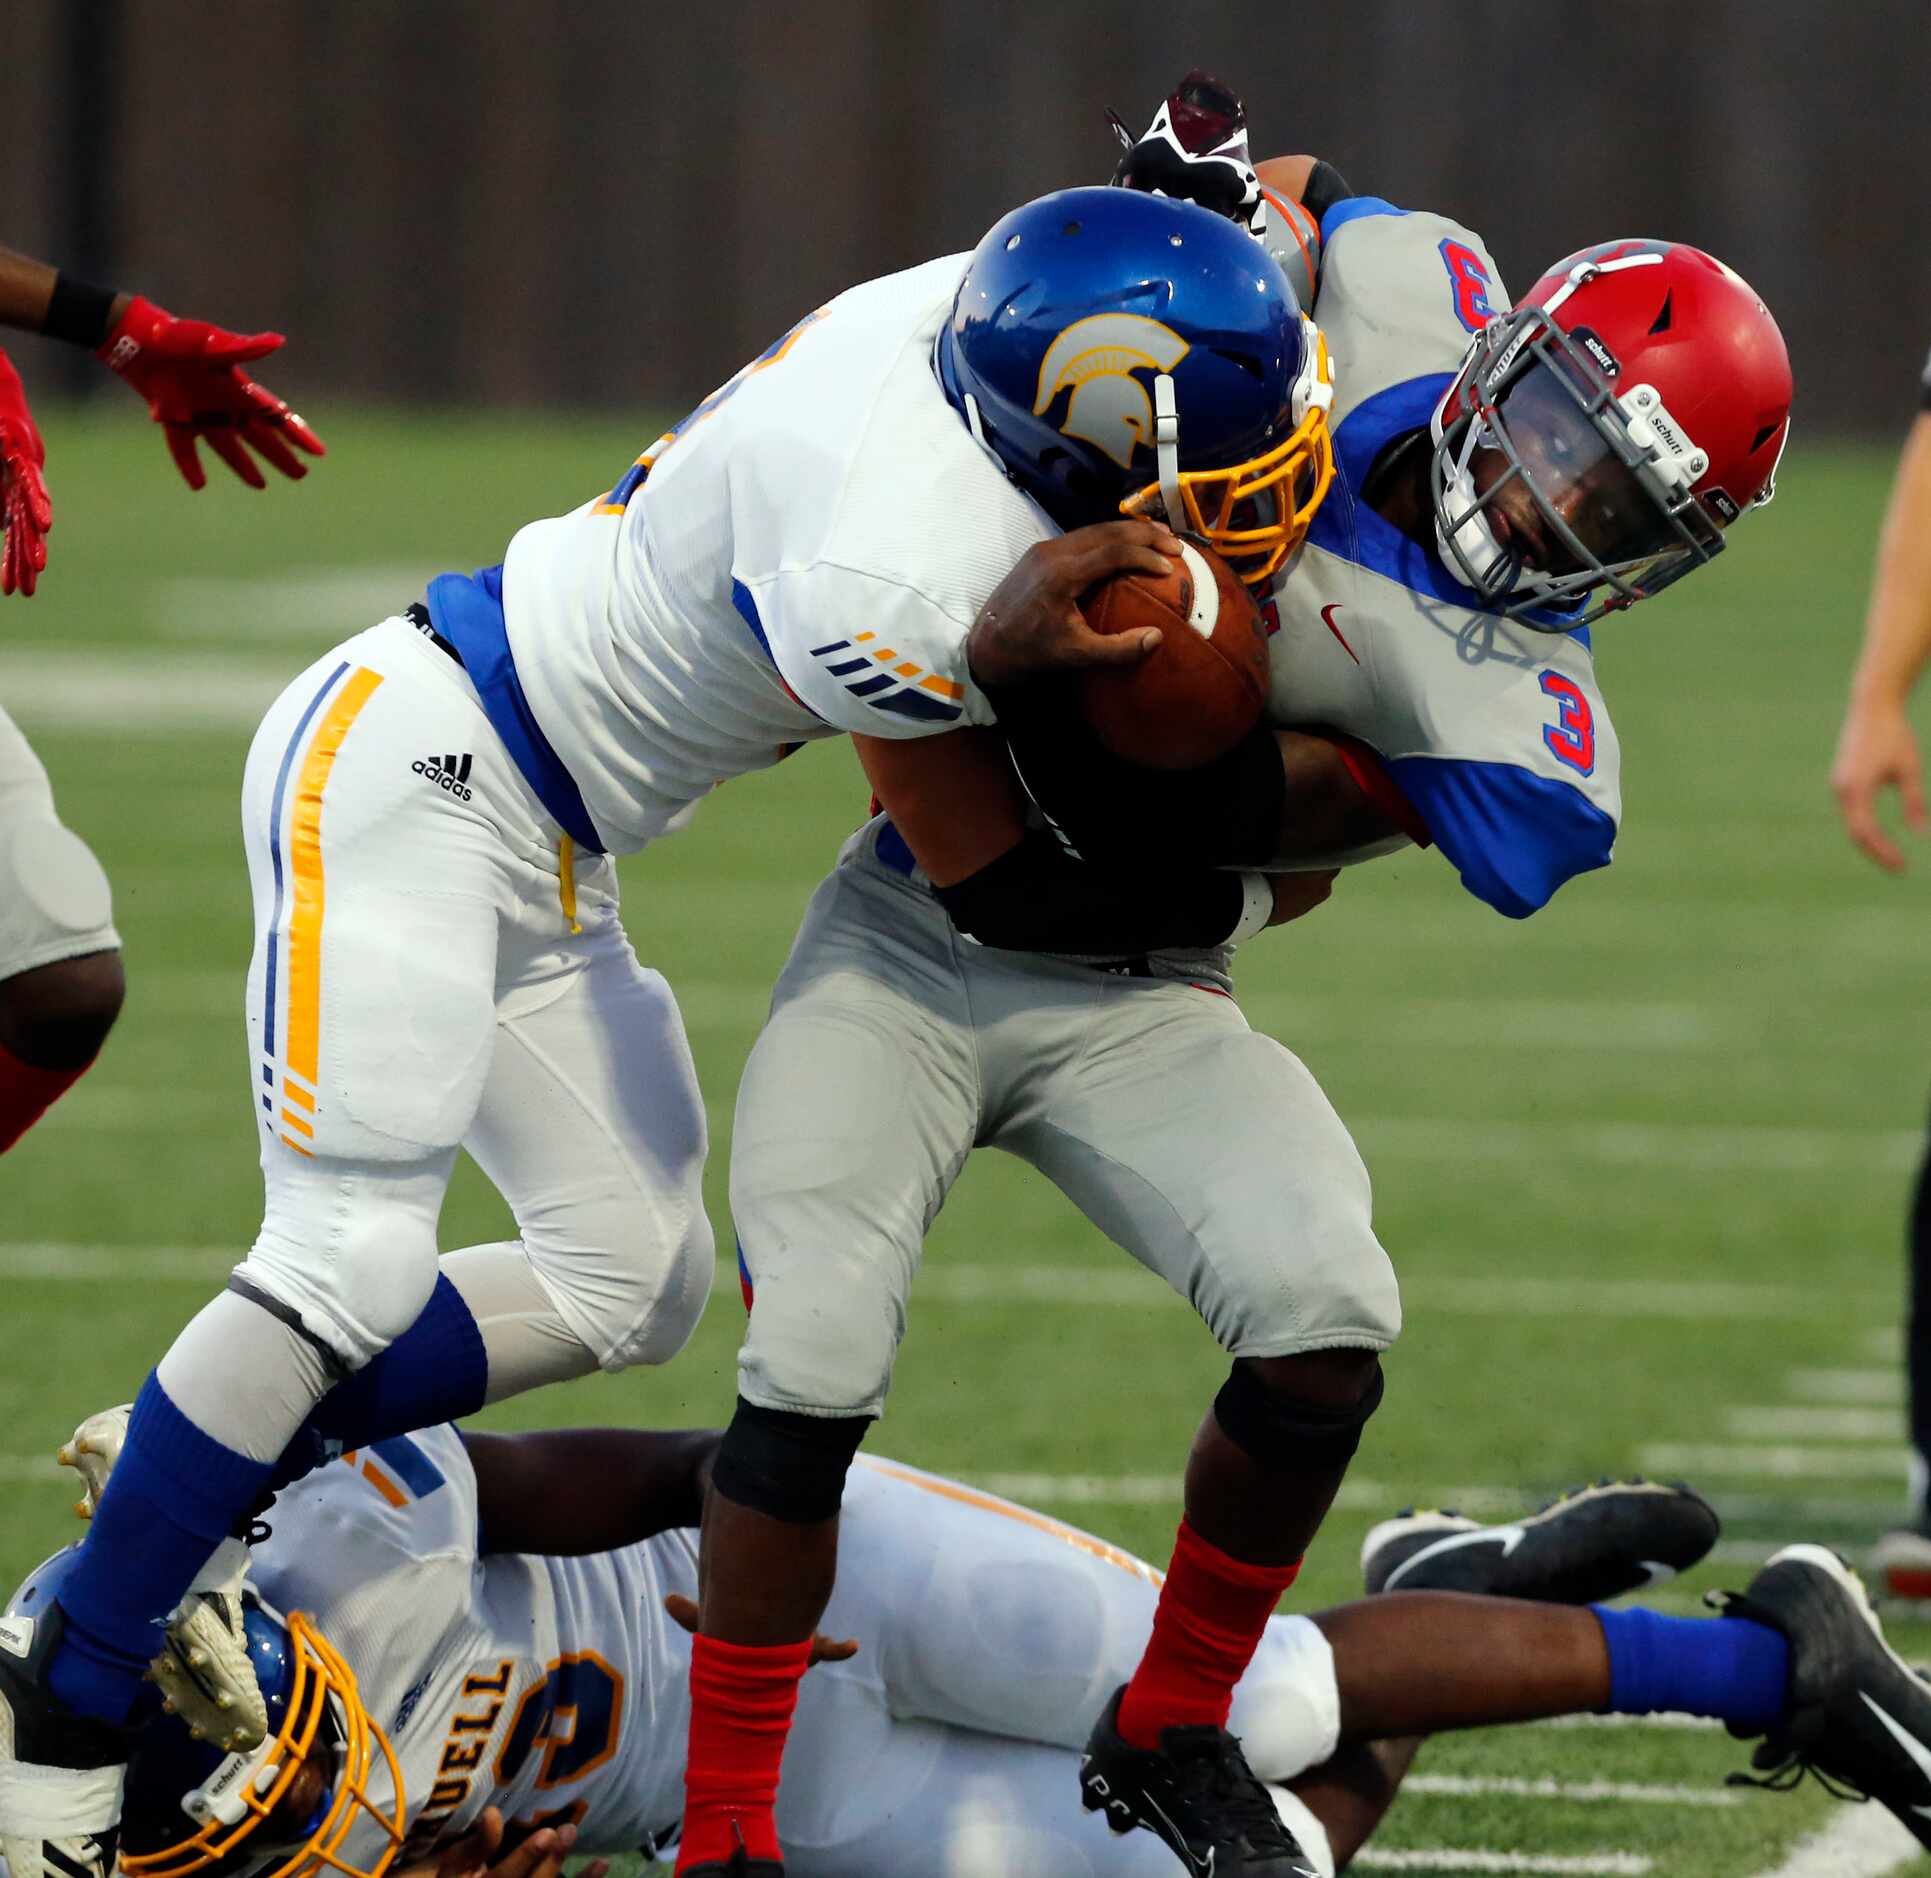 Samuell defender Jarad Martinez (8) forces Spruce QB Timad Cotton (3) out of bounds during...